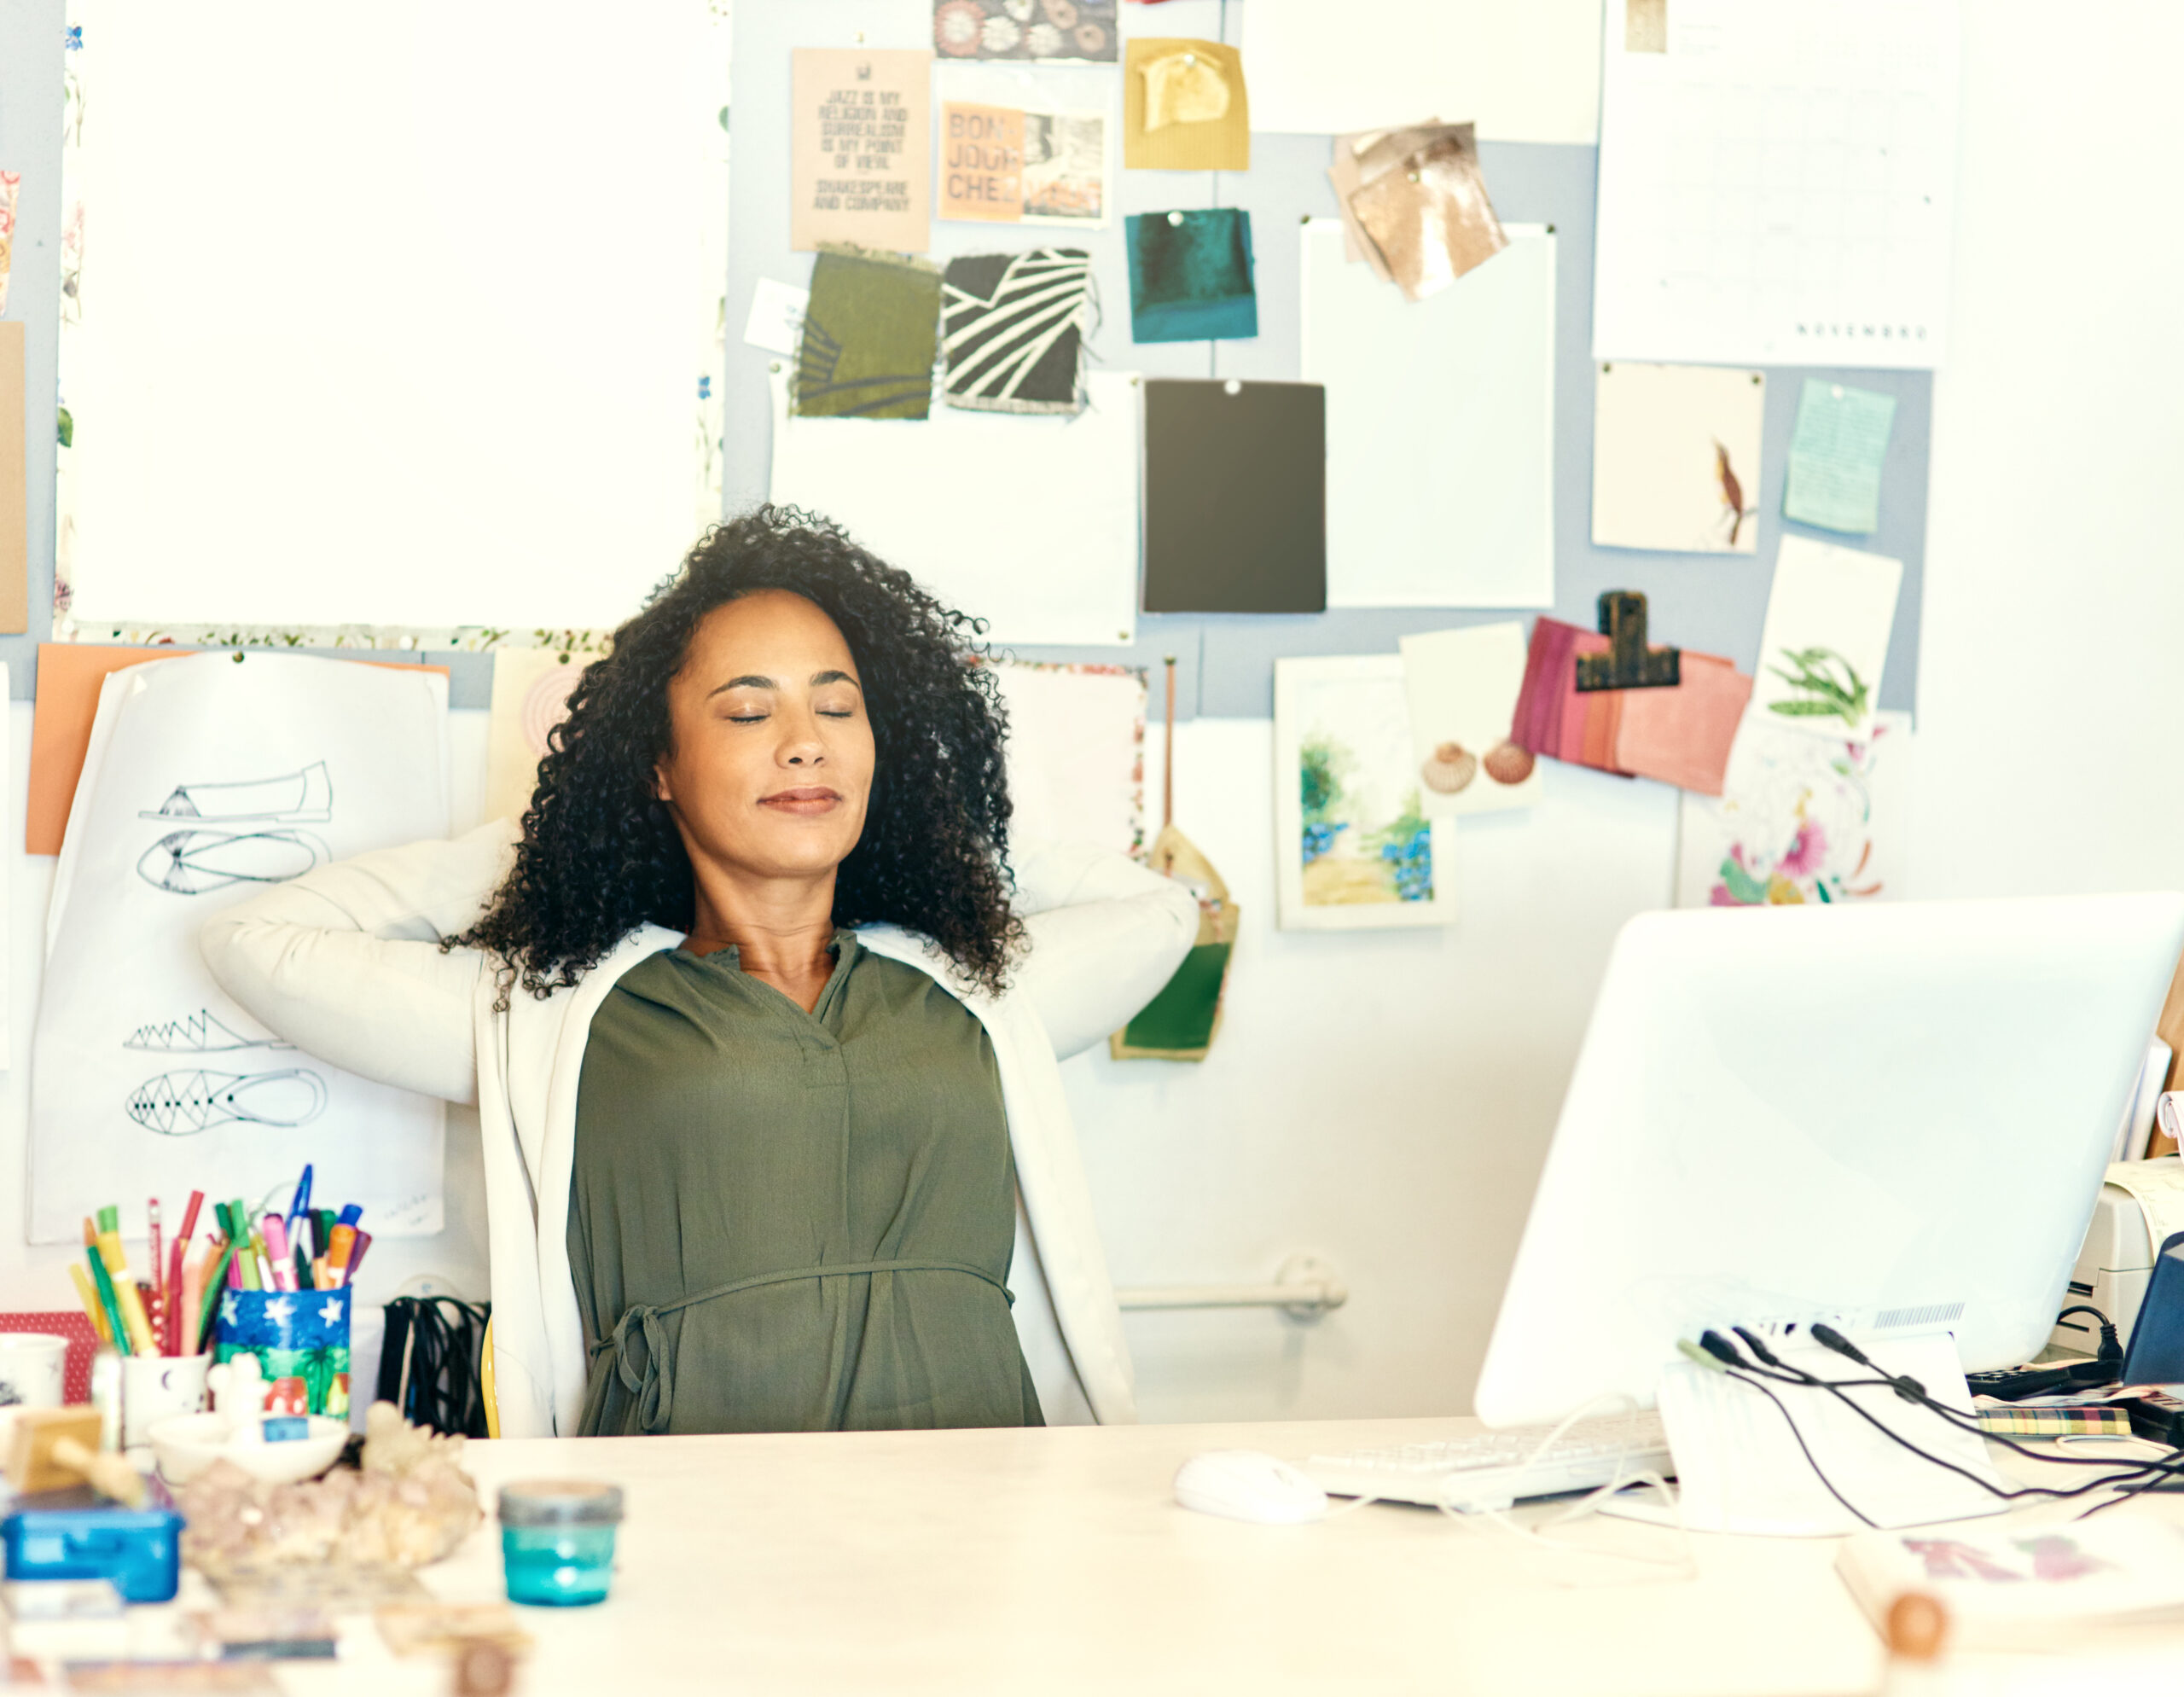 Photo of a Black woman, with long curly black hair, sitting back behind her desk, with her hands behind her head and her eyes closed.